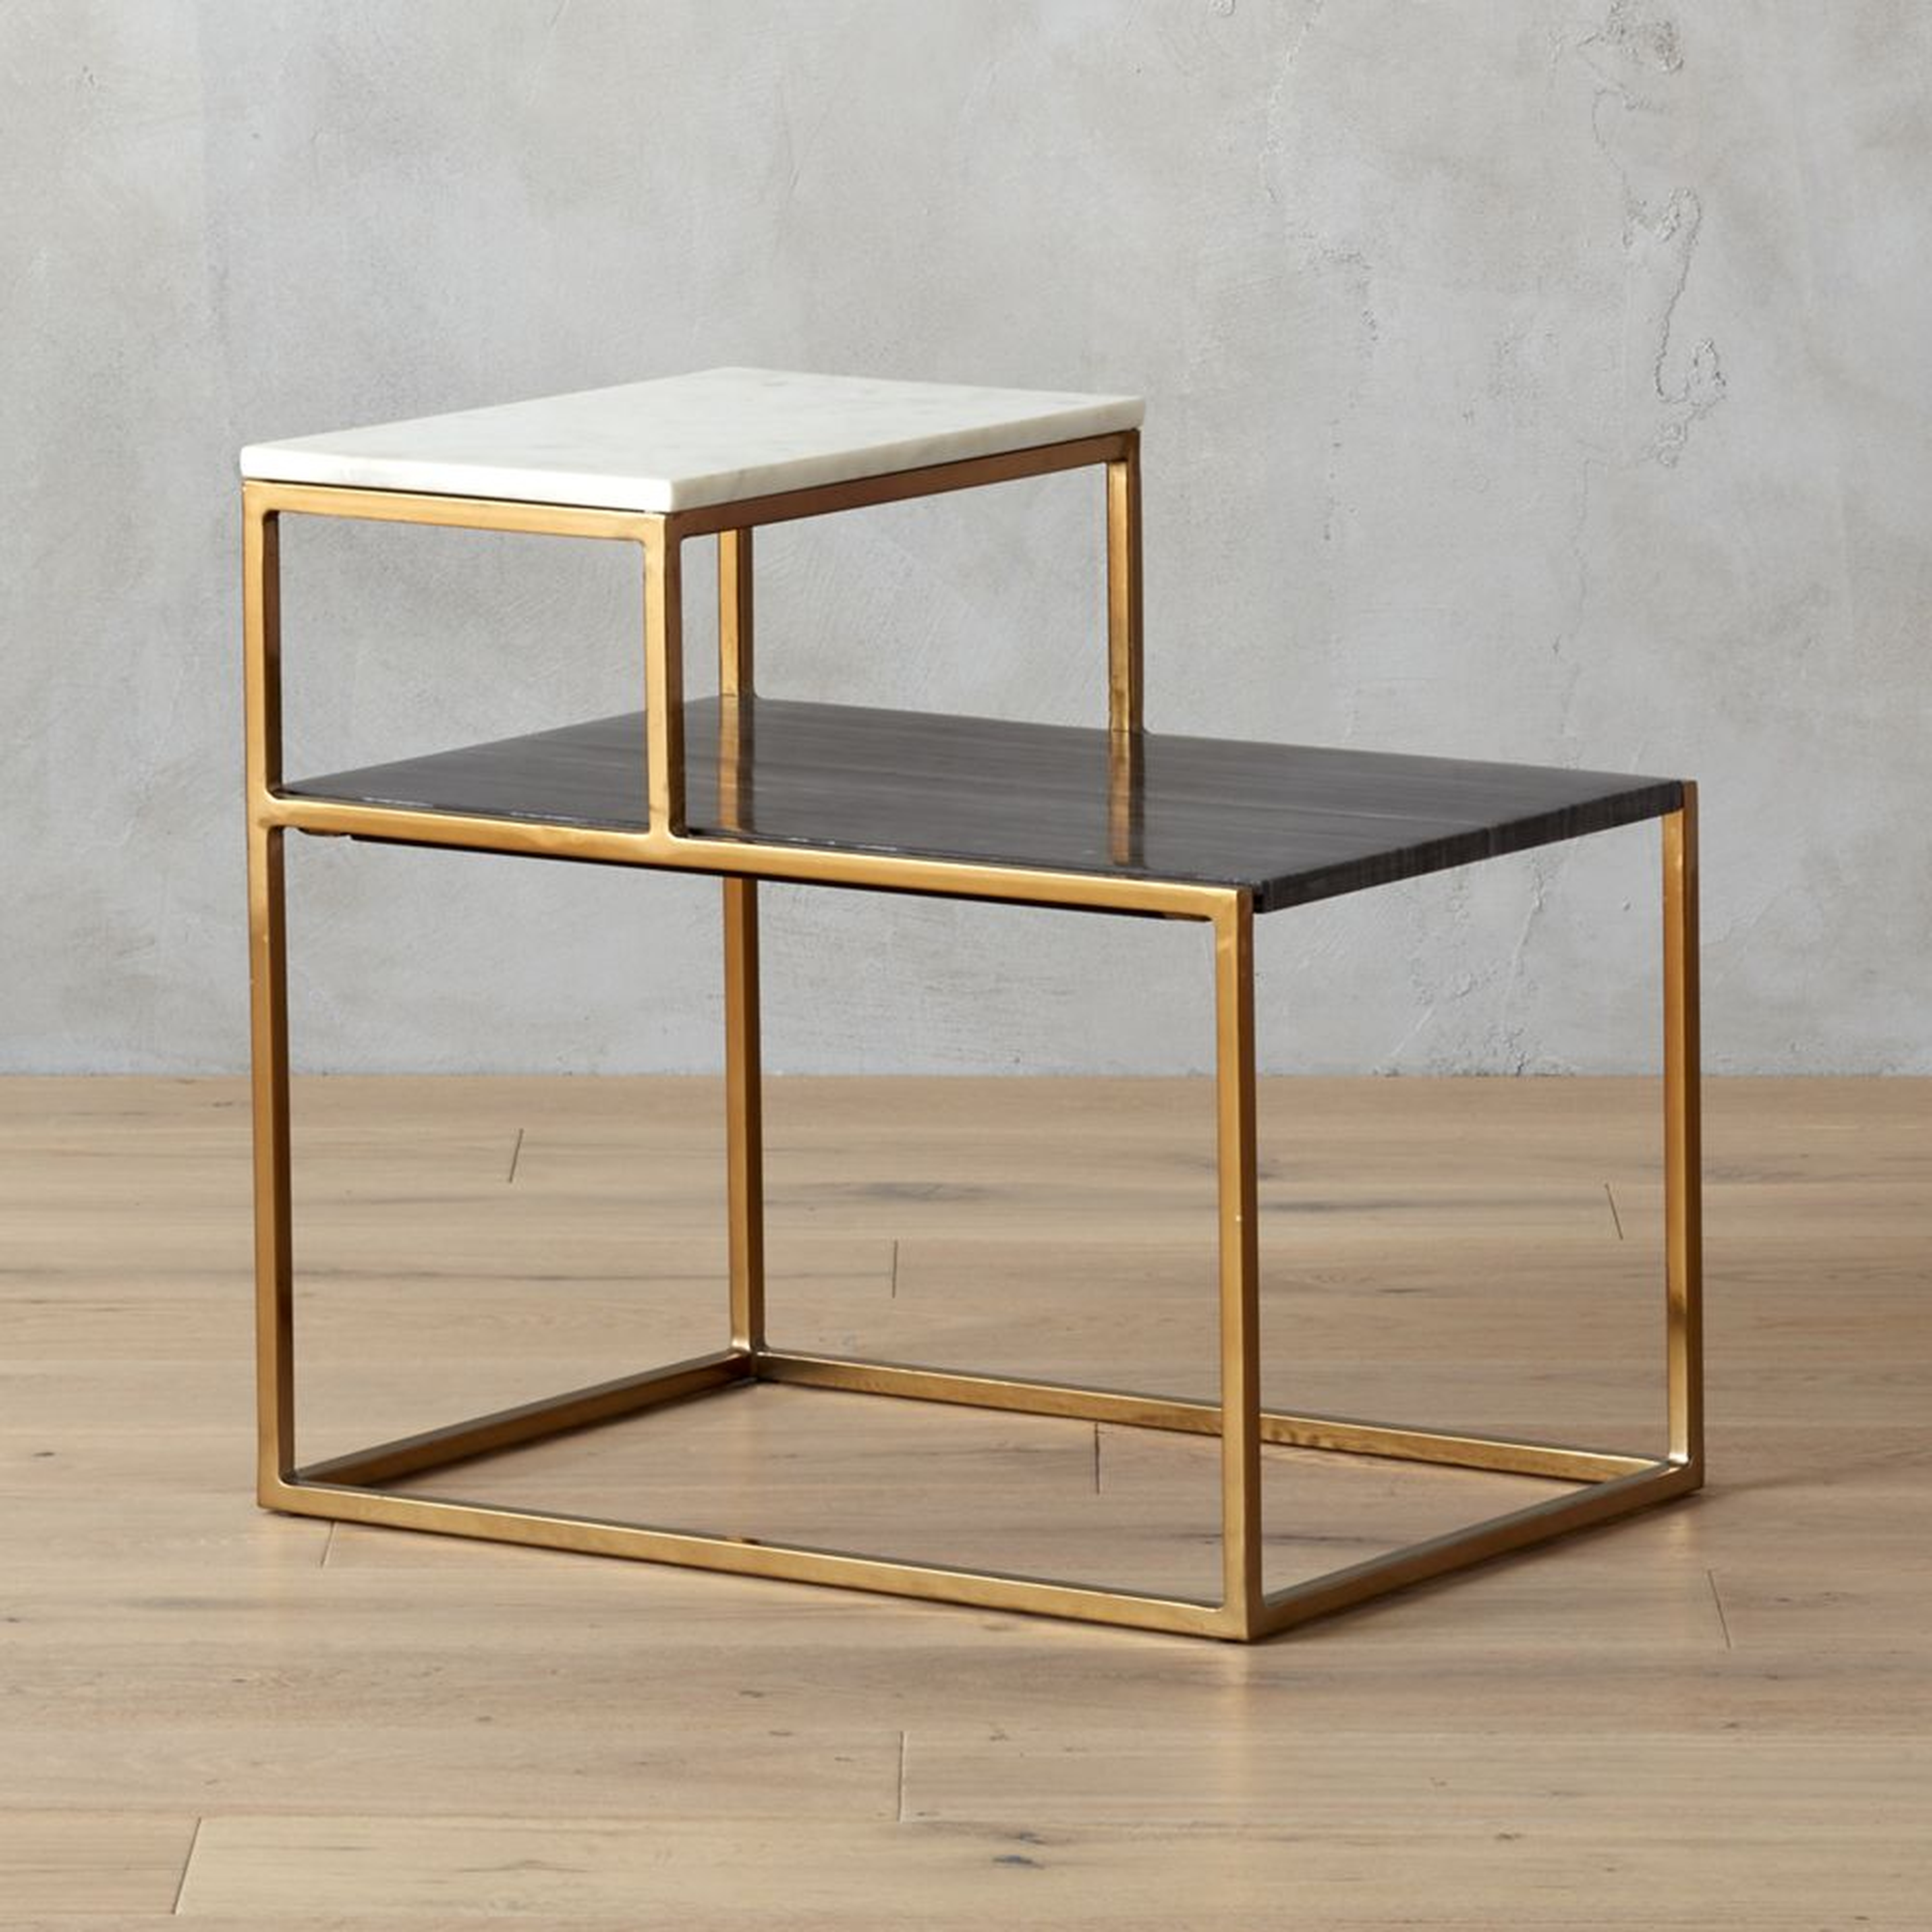 2 tone grey and white marble side table RESTOCK Late April 2022 - CB2